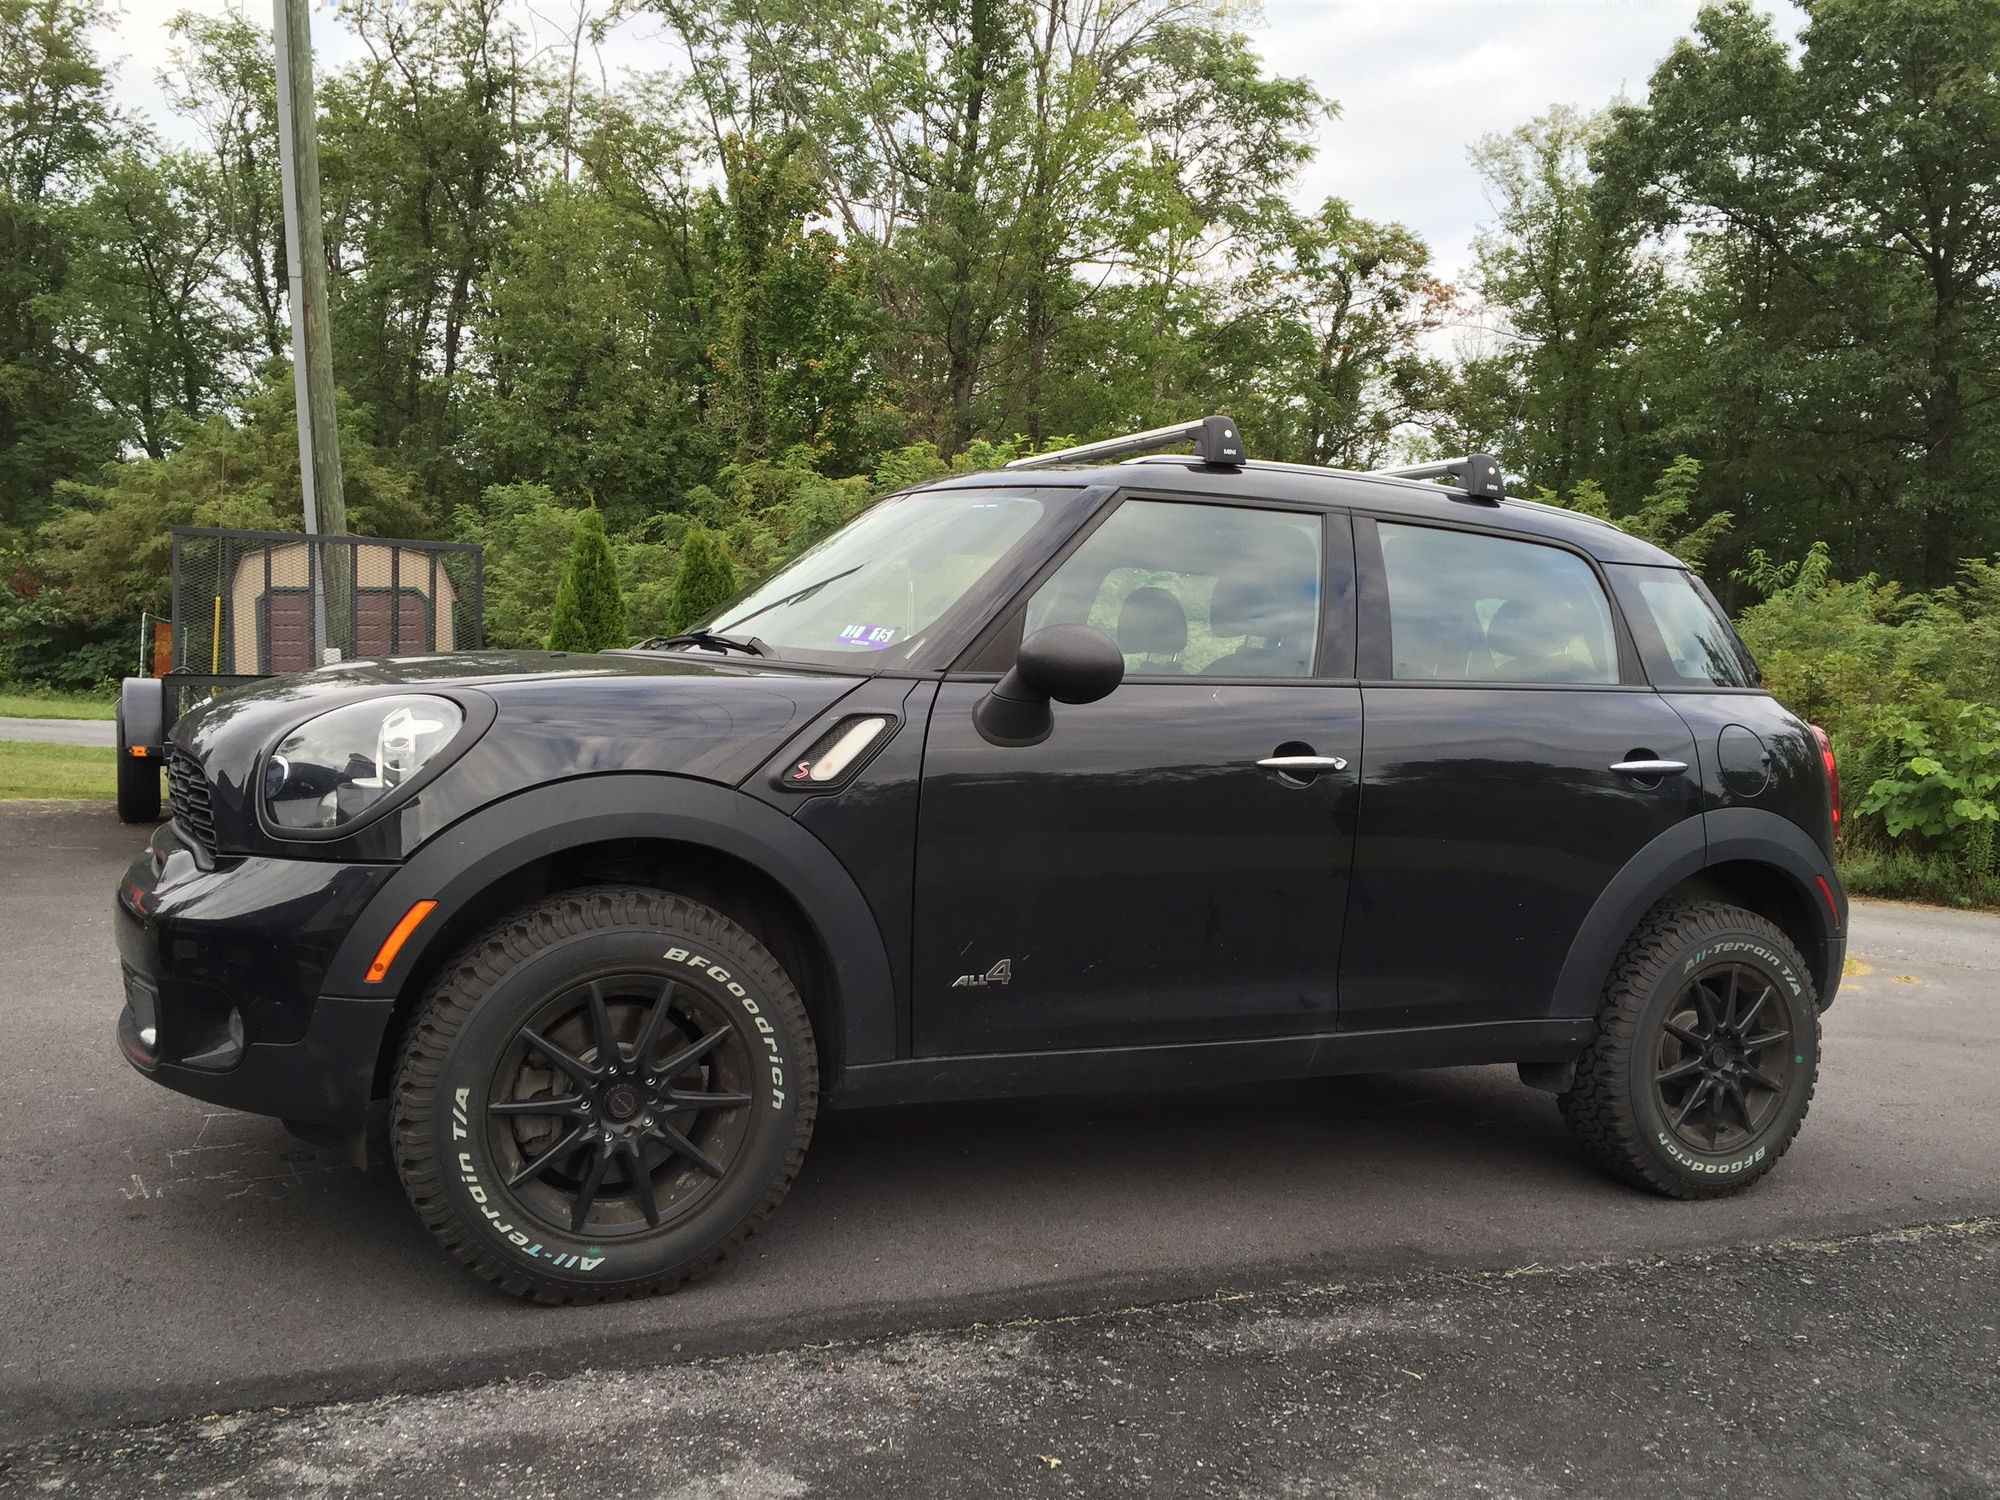 New lifted blacked out countryman - Page 2 - North American Motoring